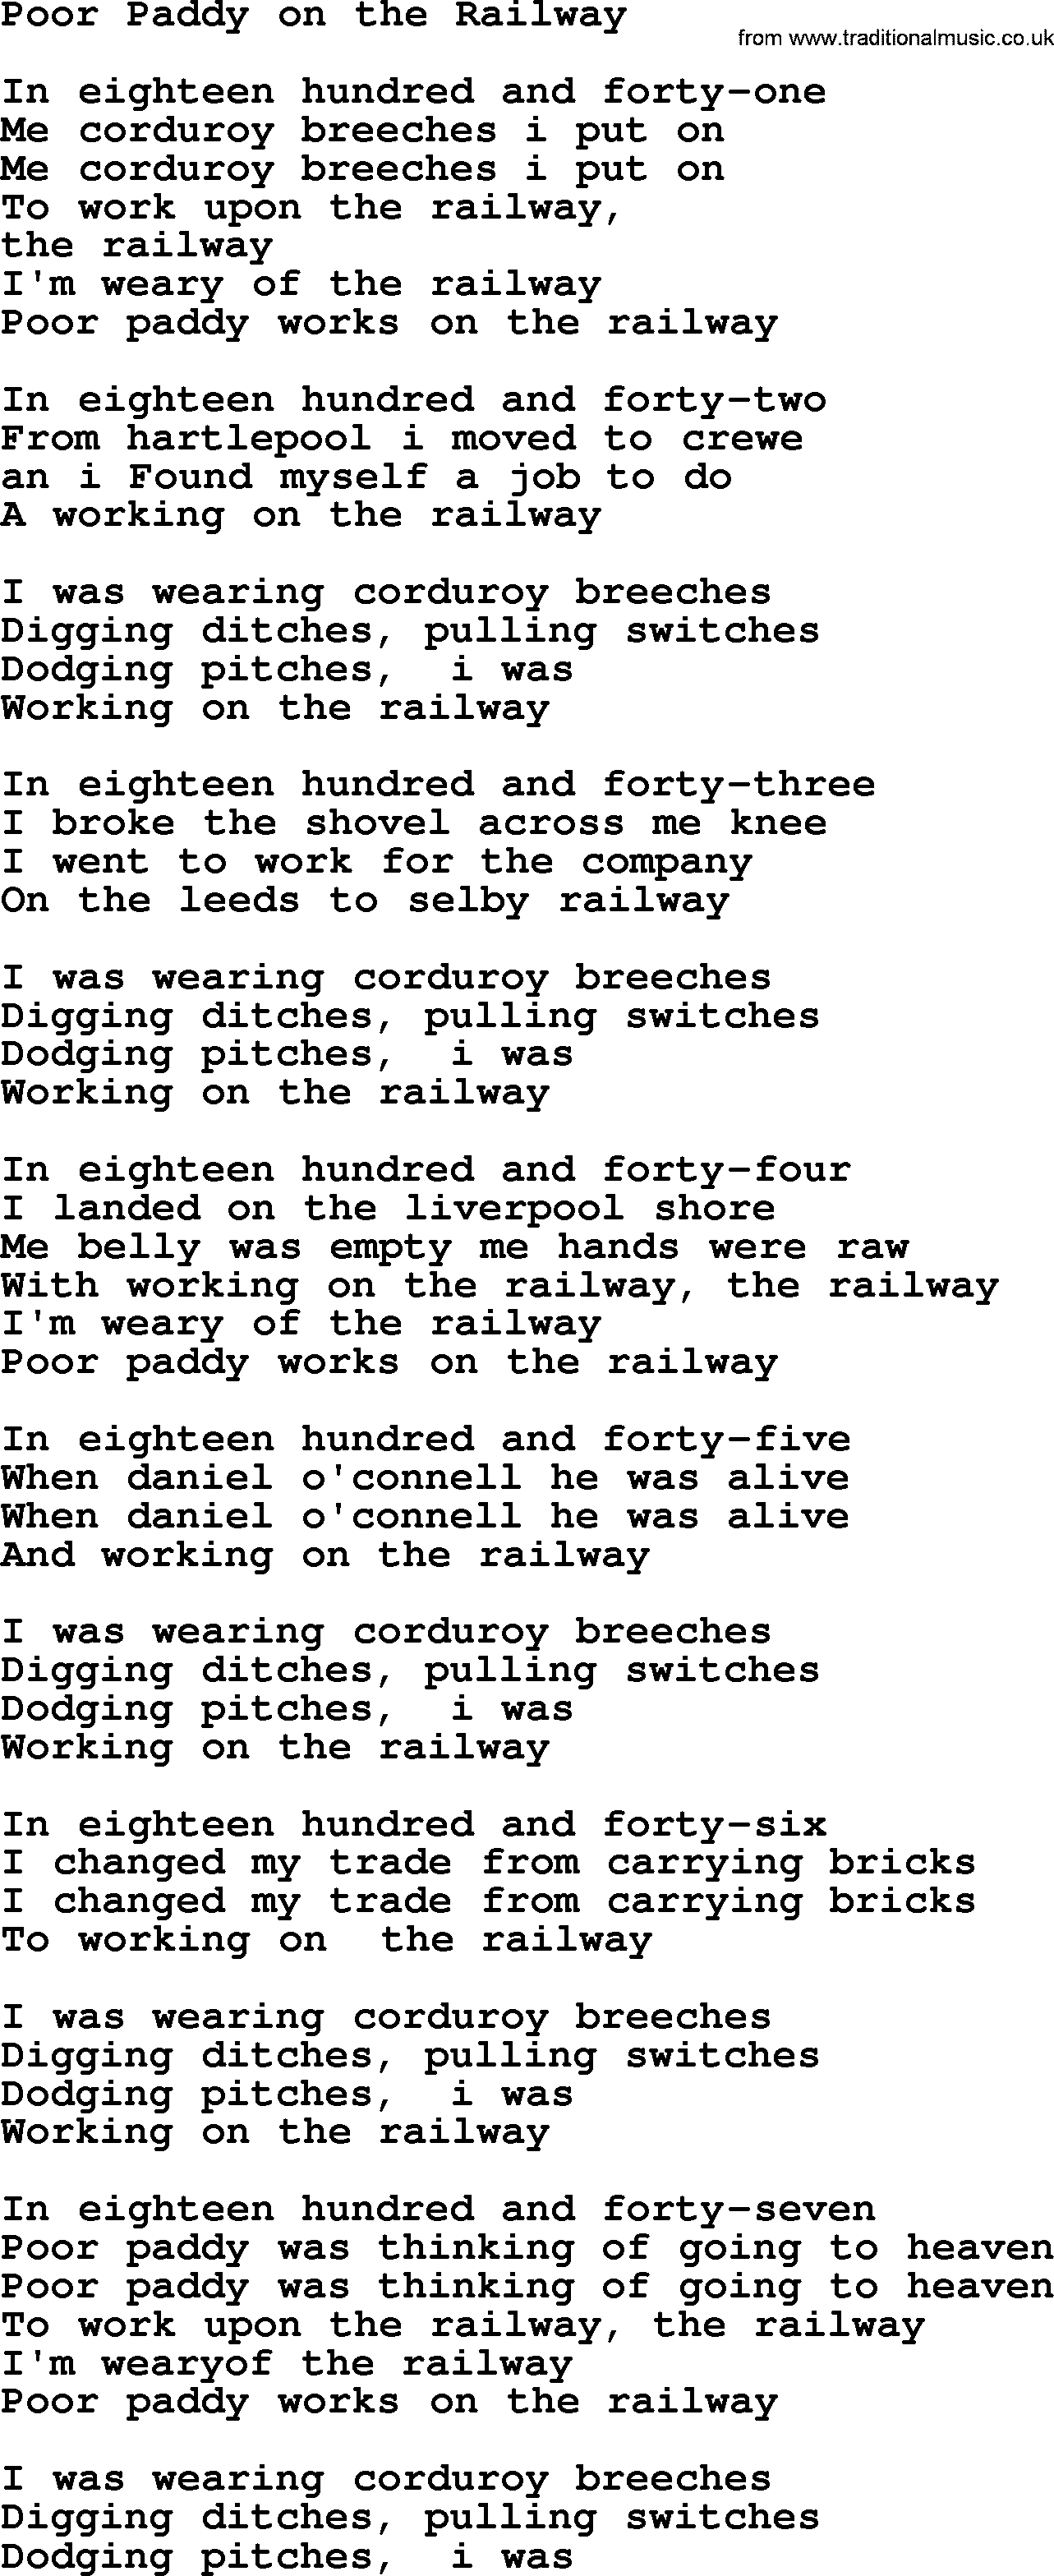 The Dubliners song: Poor Paddy On The Railway, lyrics